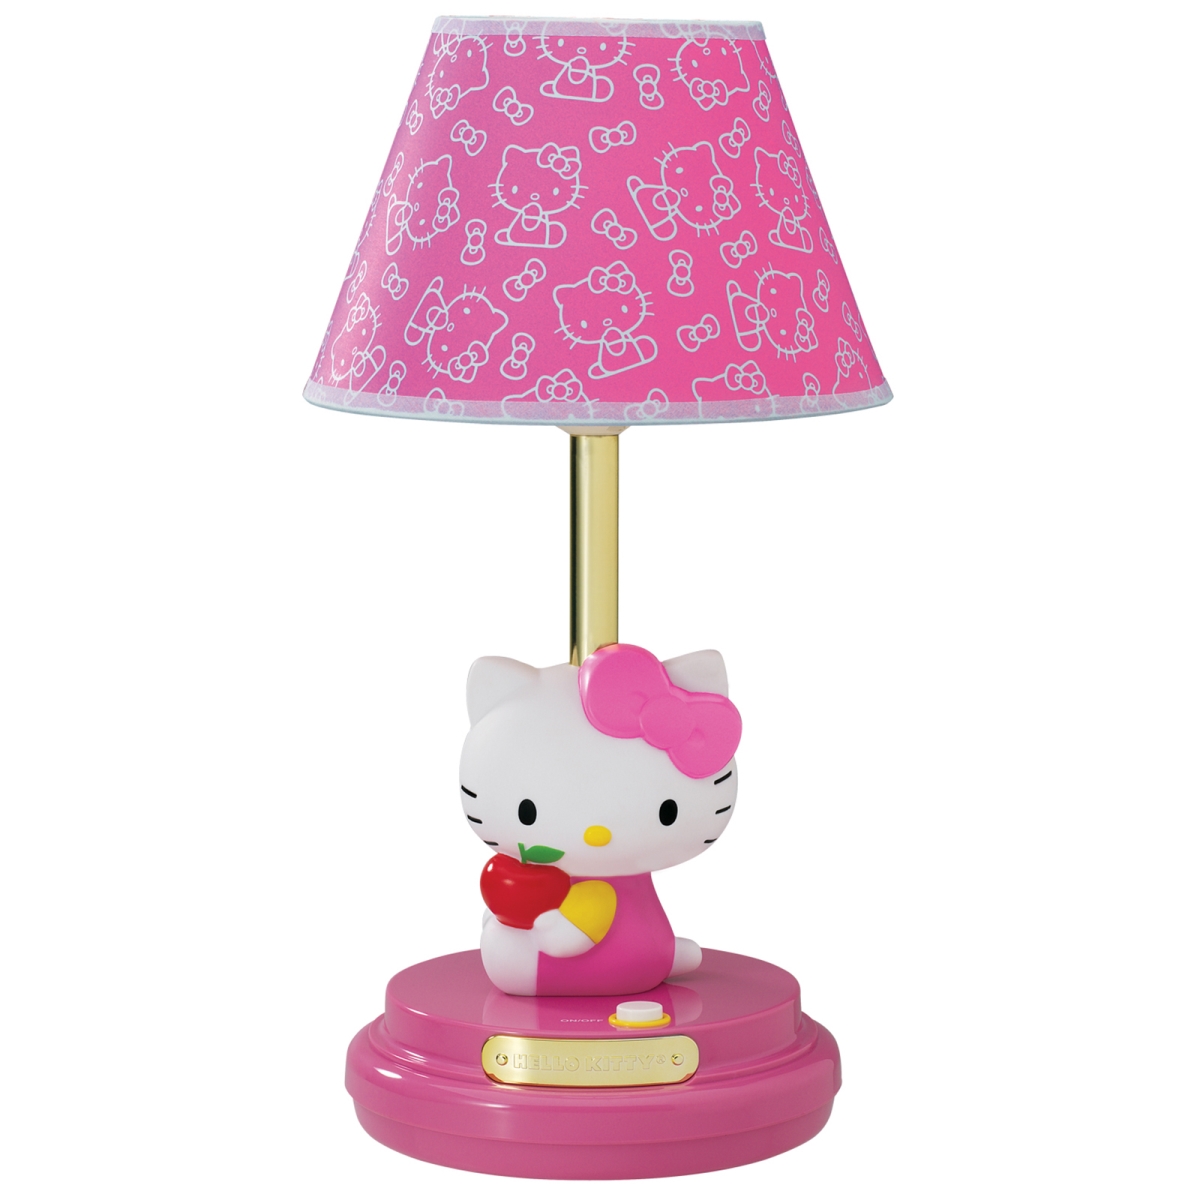 Kt3095ap Table Lamp, Pink